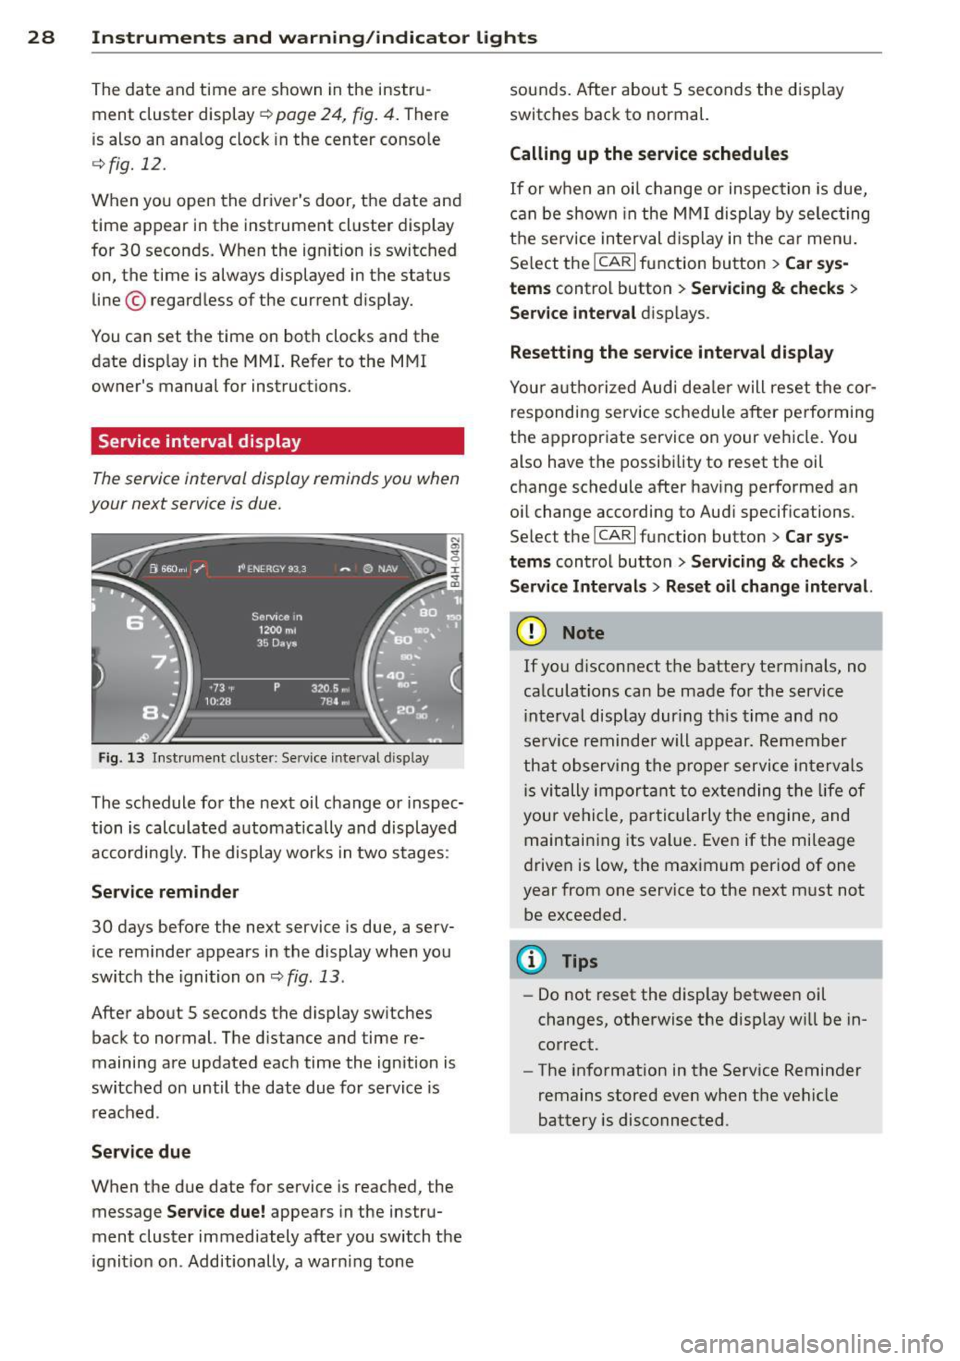 AUDI S8 2014  Owners Manual 28  Instruments  and  warning/indicator  lights 
The date  and time  are shown  in the  instru­
ment  cluster  d isplay 
c:;, page  24,  fig.  4.  There 
is  also an ana log clock  in the  center  co